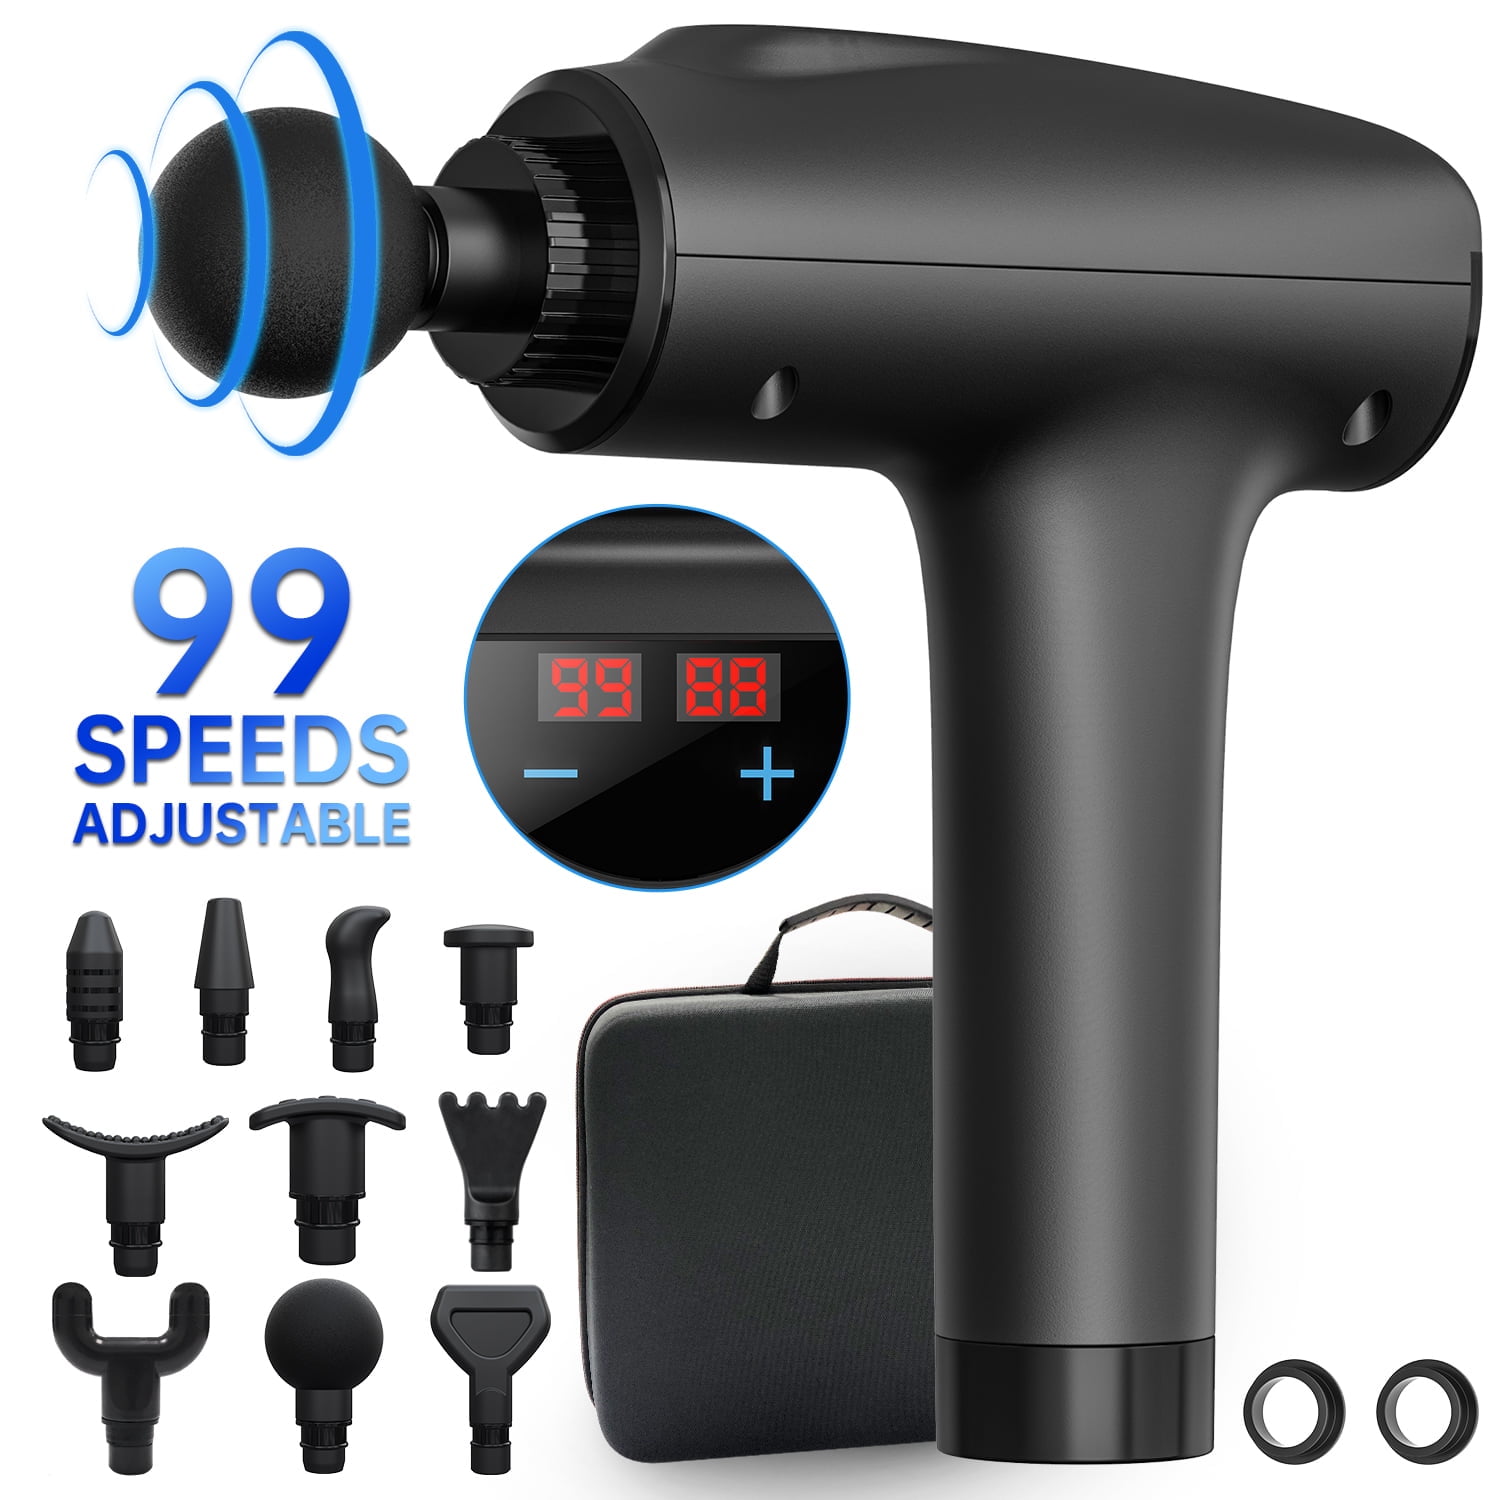 99 Speed Muscle Massage Gun, Deep Tissue Muscle Massager for Pain Relief, Handheld Electric Body Massager Sports Drill Portable Super Quiet Brushless Motor - image 1 of 7